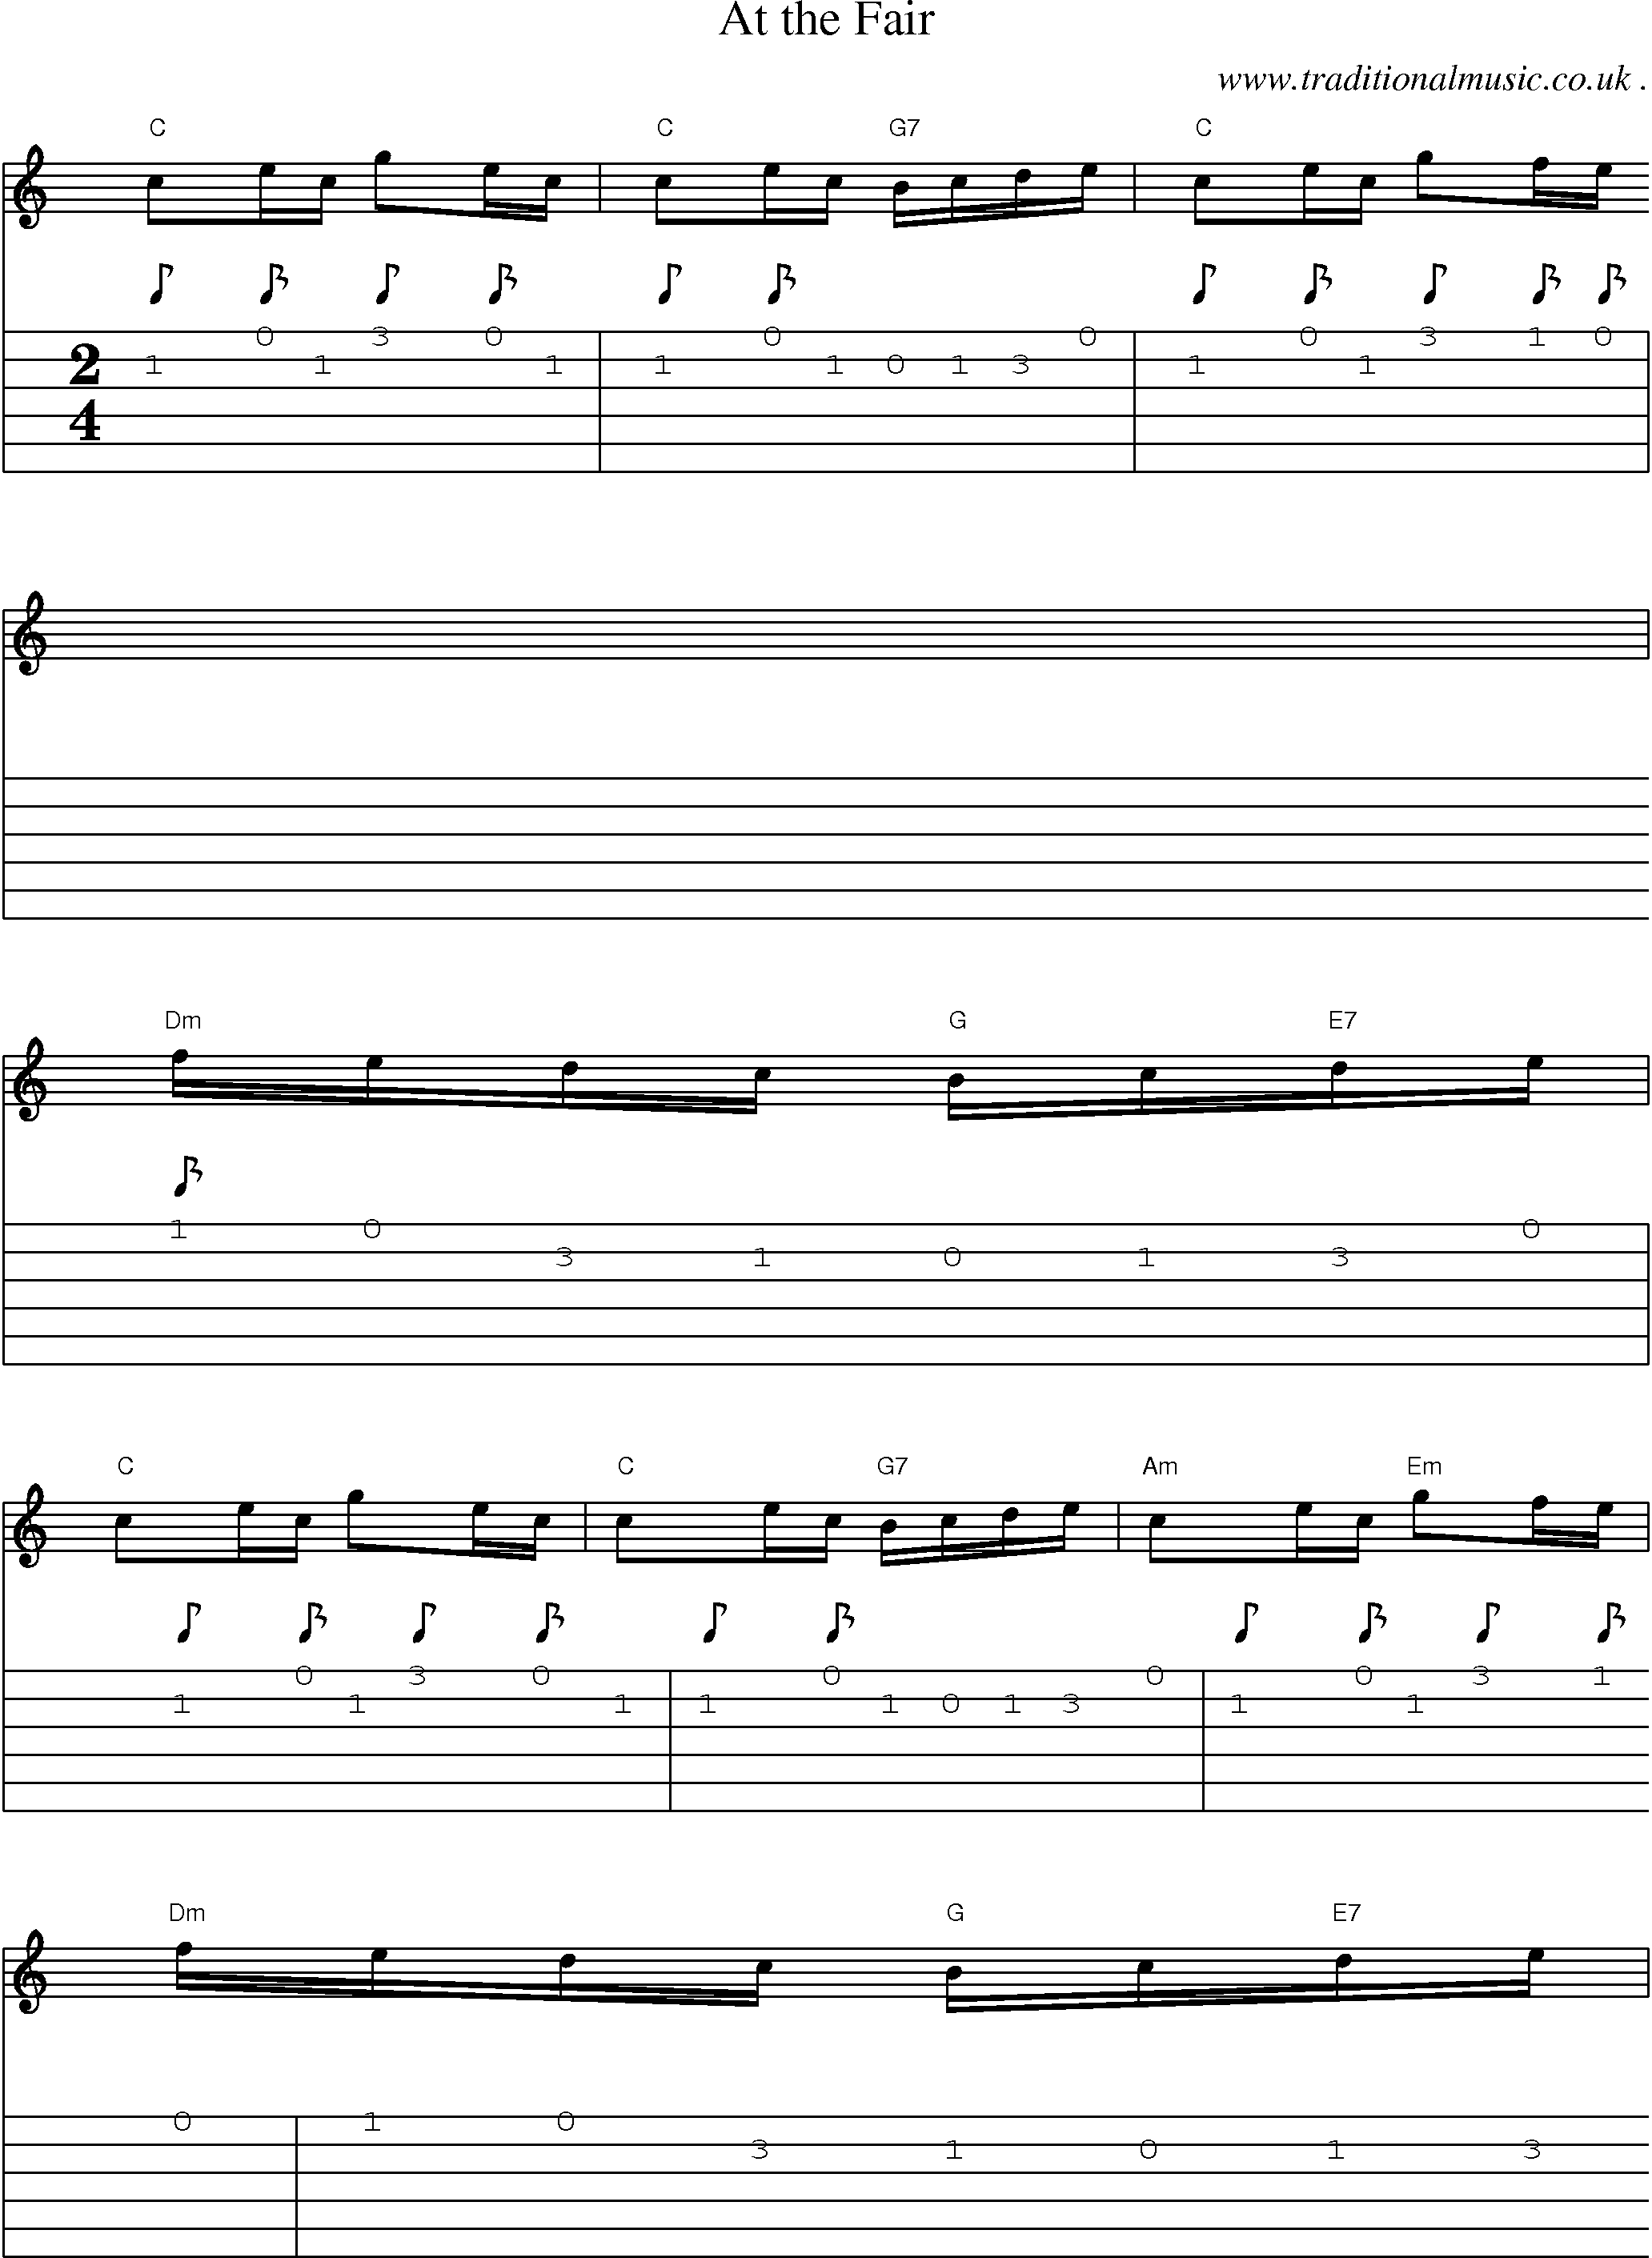 Sheet-music  score, Chords and Guitar Tabs for At The Fair